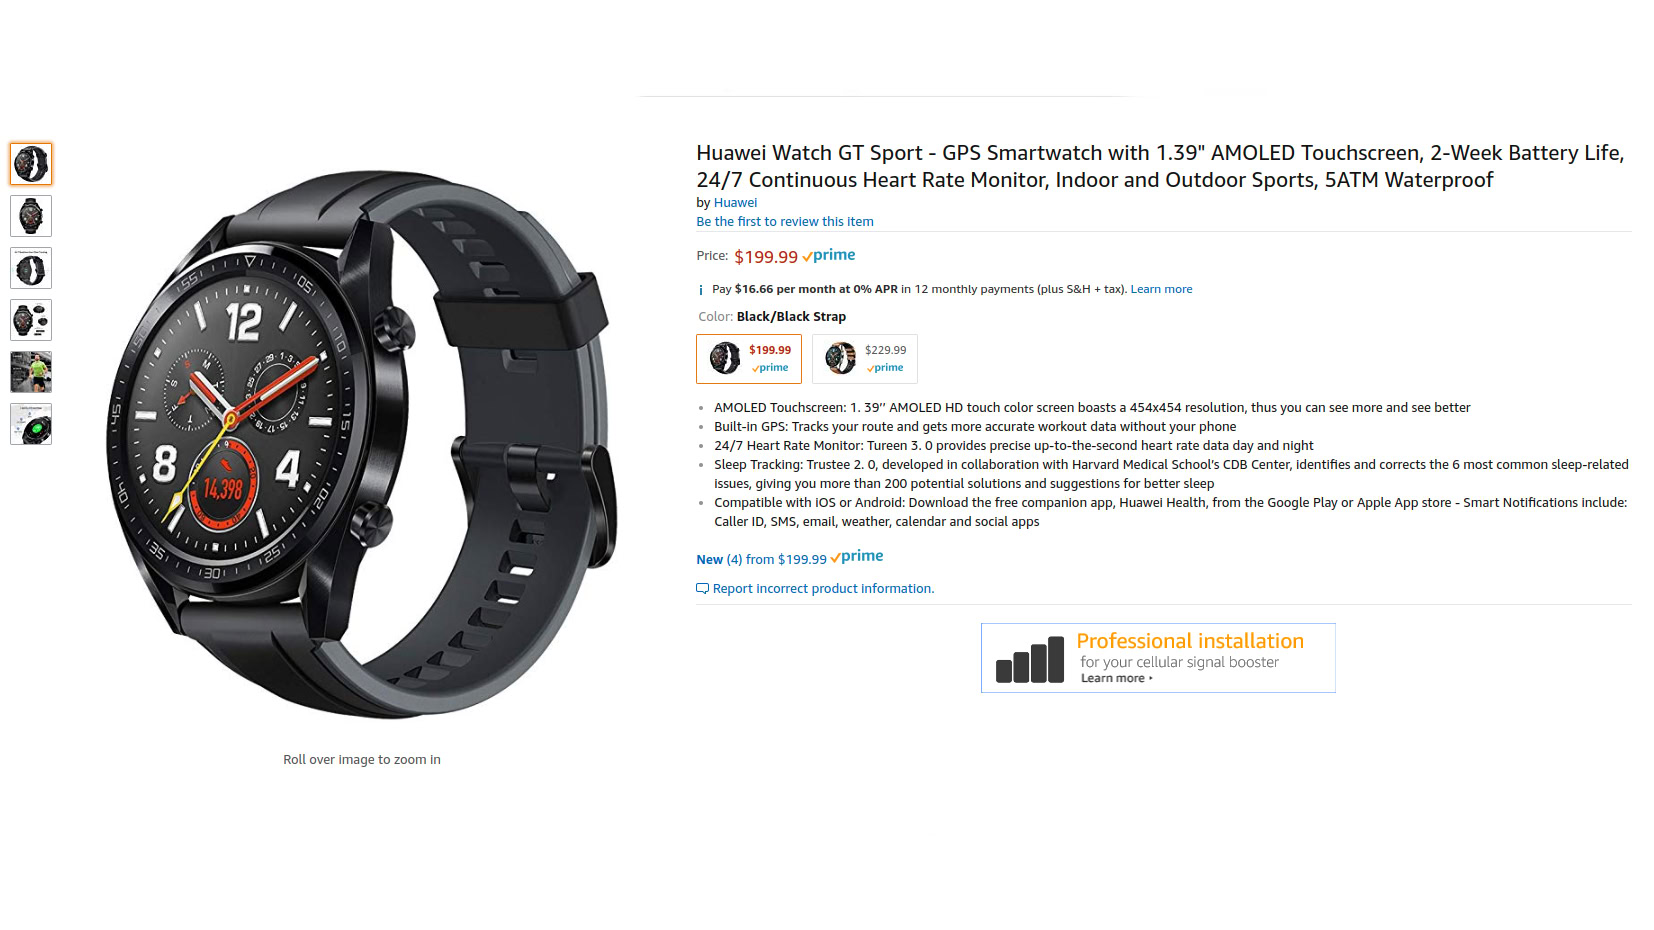 Huawei Watch GT available US for $200 - Authority